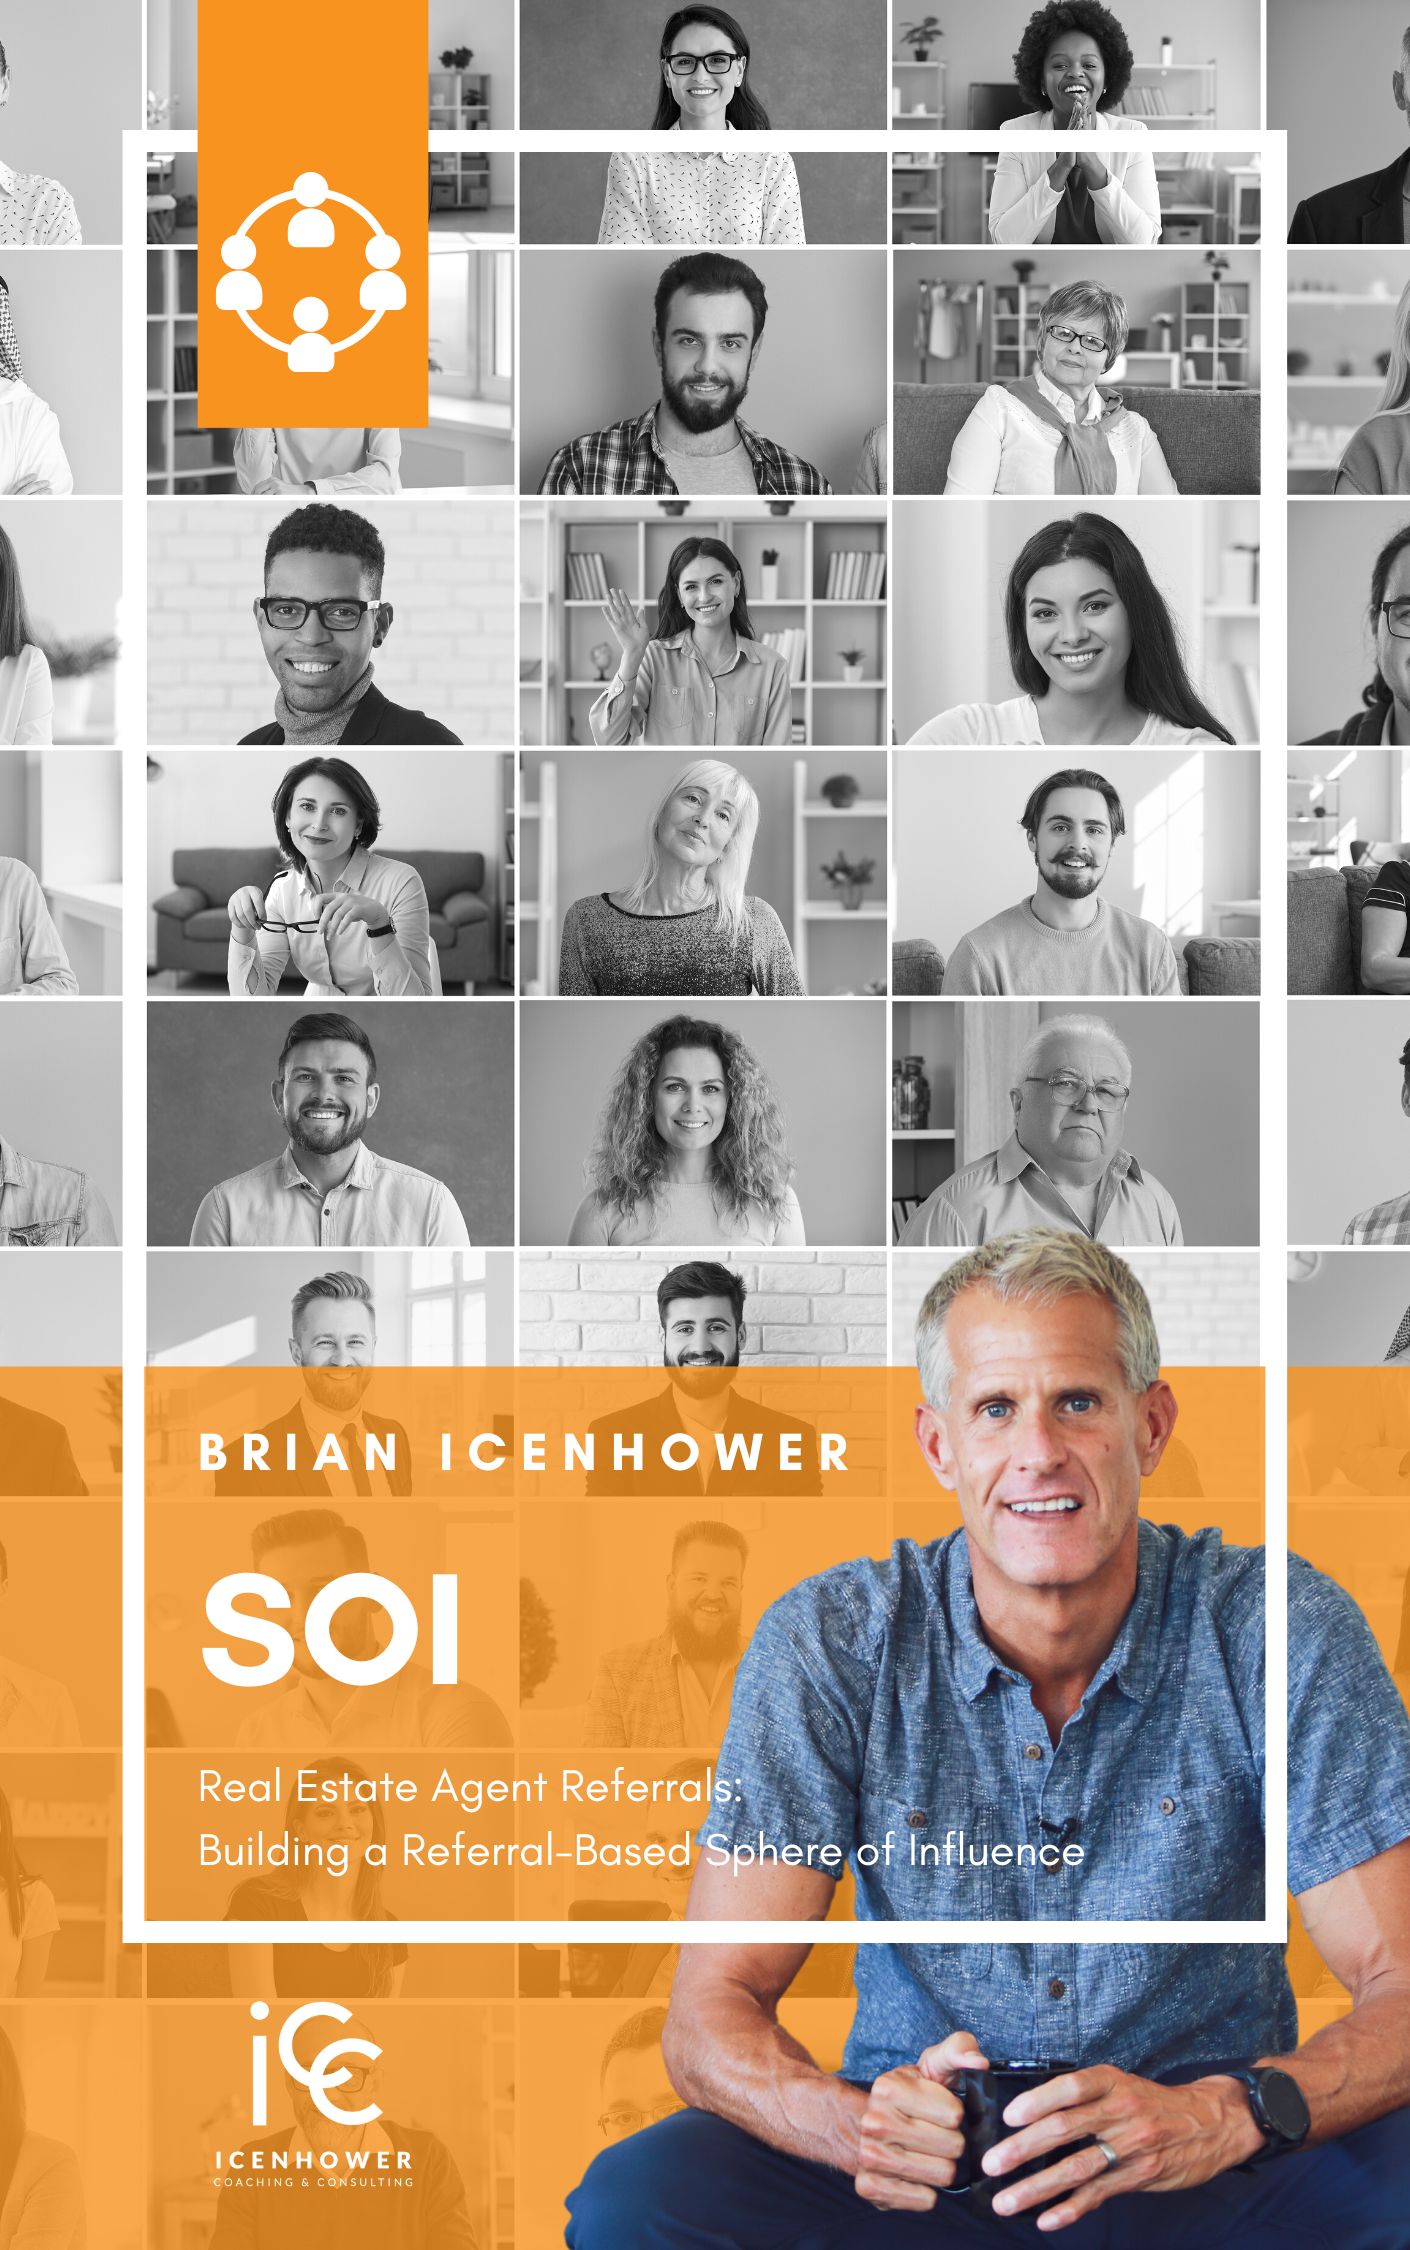 SOI: Building a Real Estate Agent’s Sphere of Influence